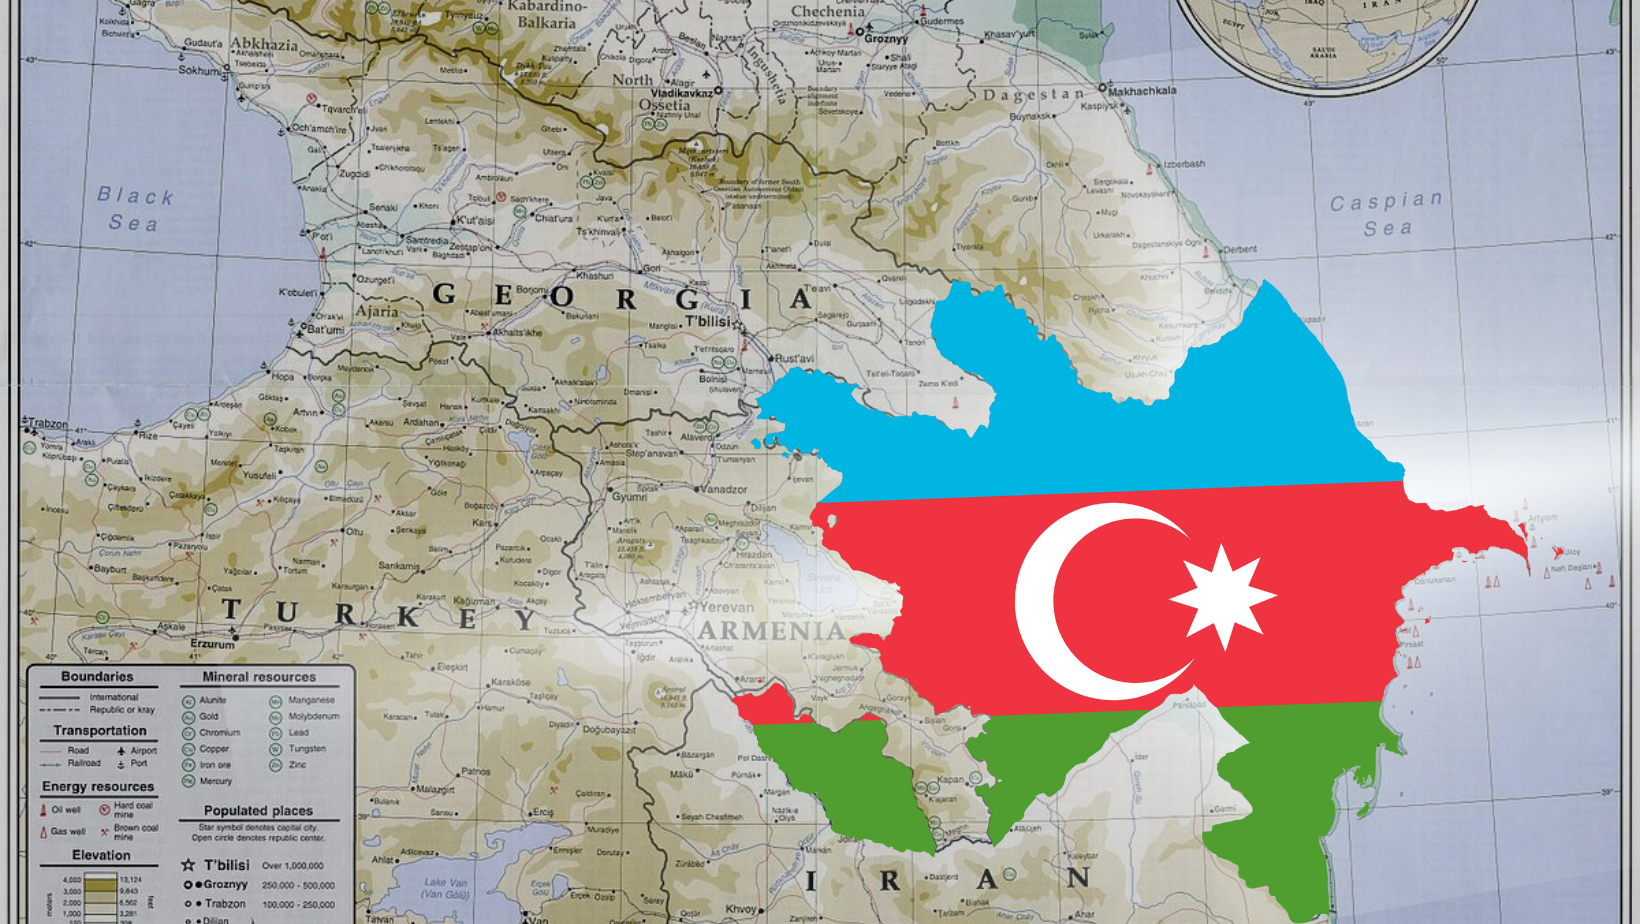 Azerbaijan takes lead in changing S Caucasus into world's safest region [ANALYSIS]